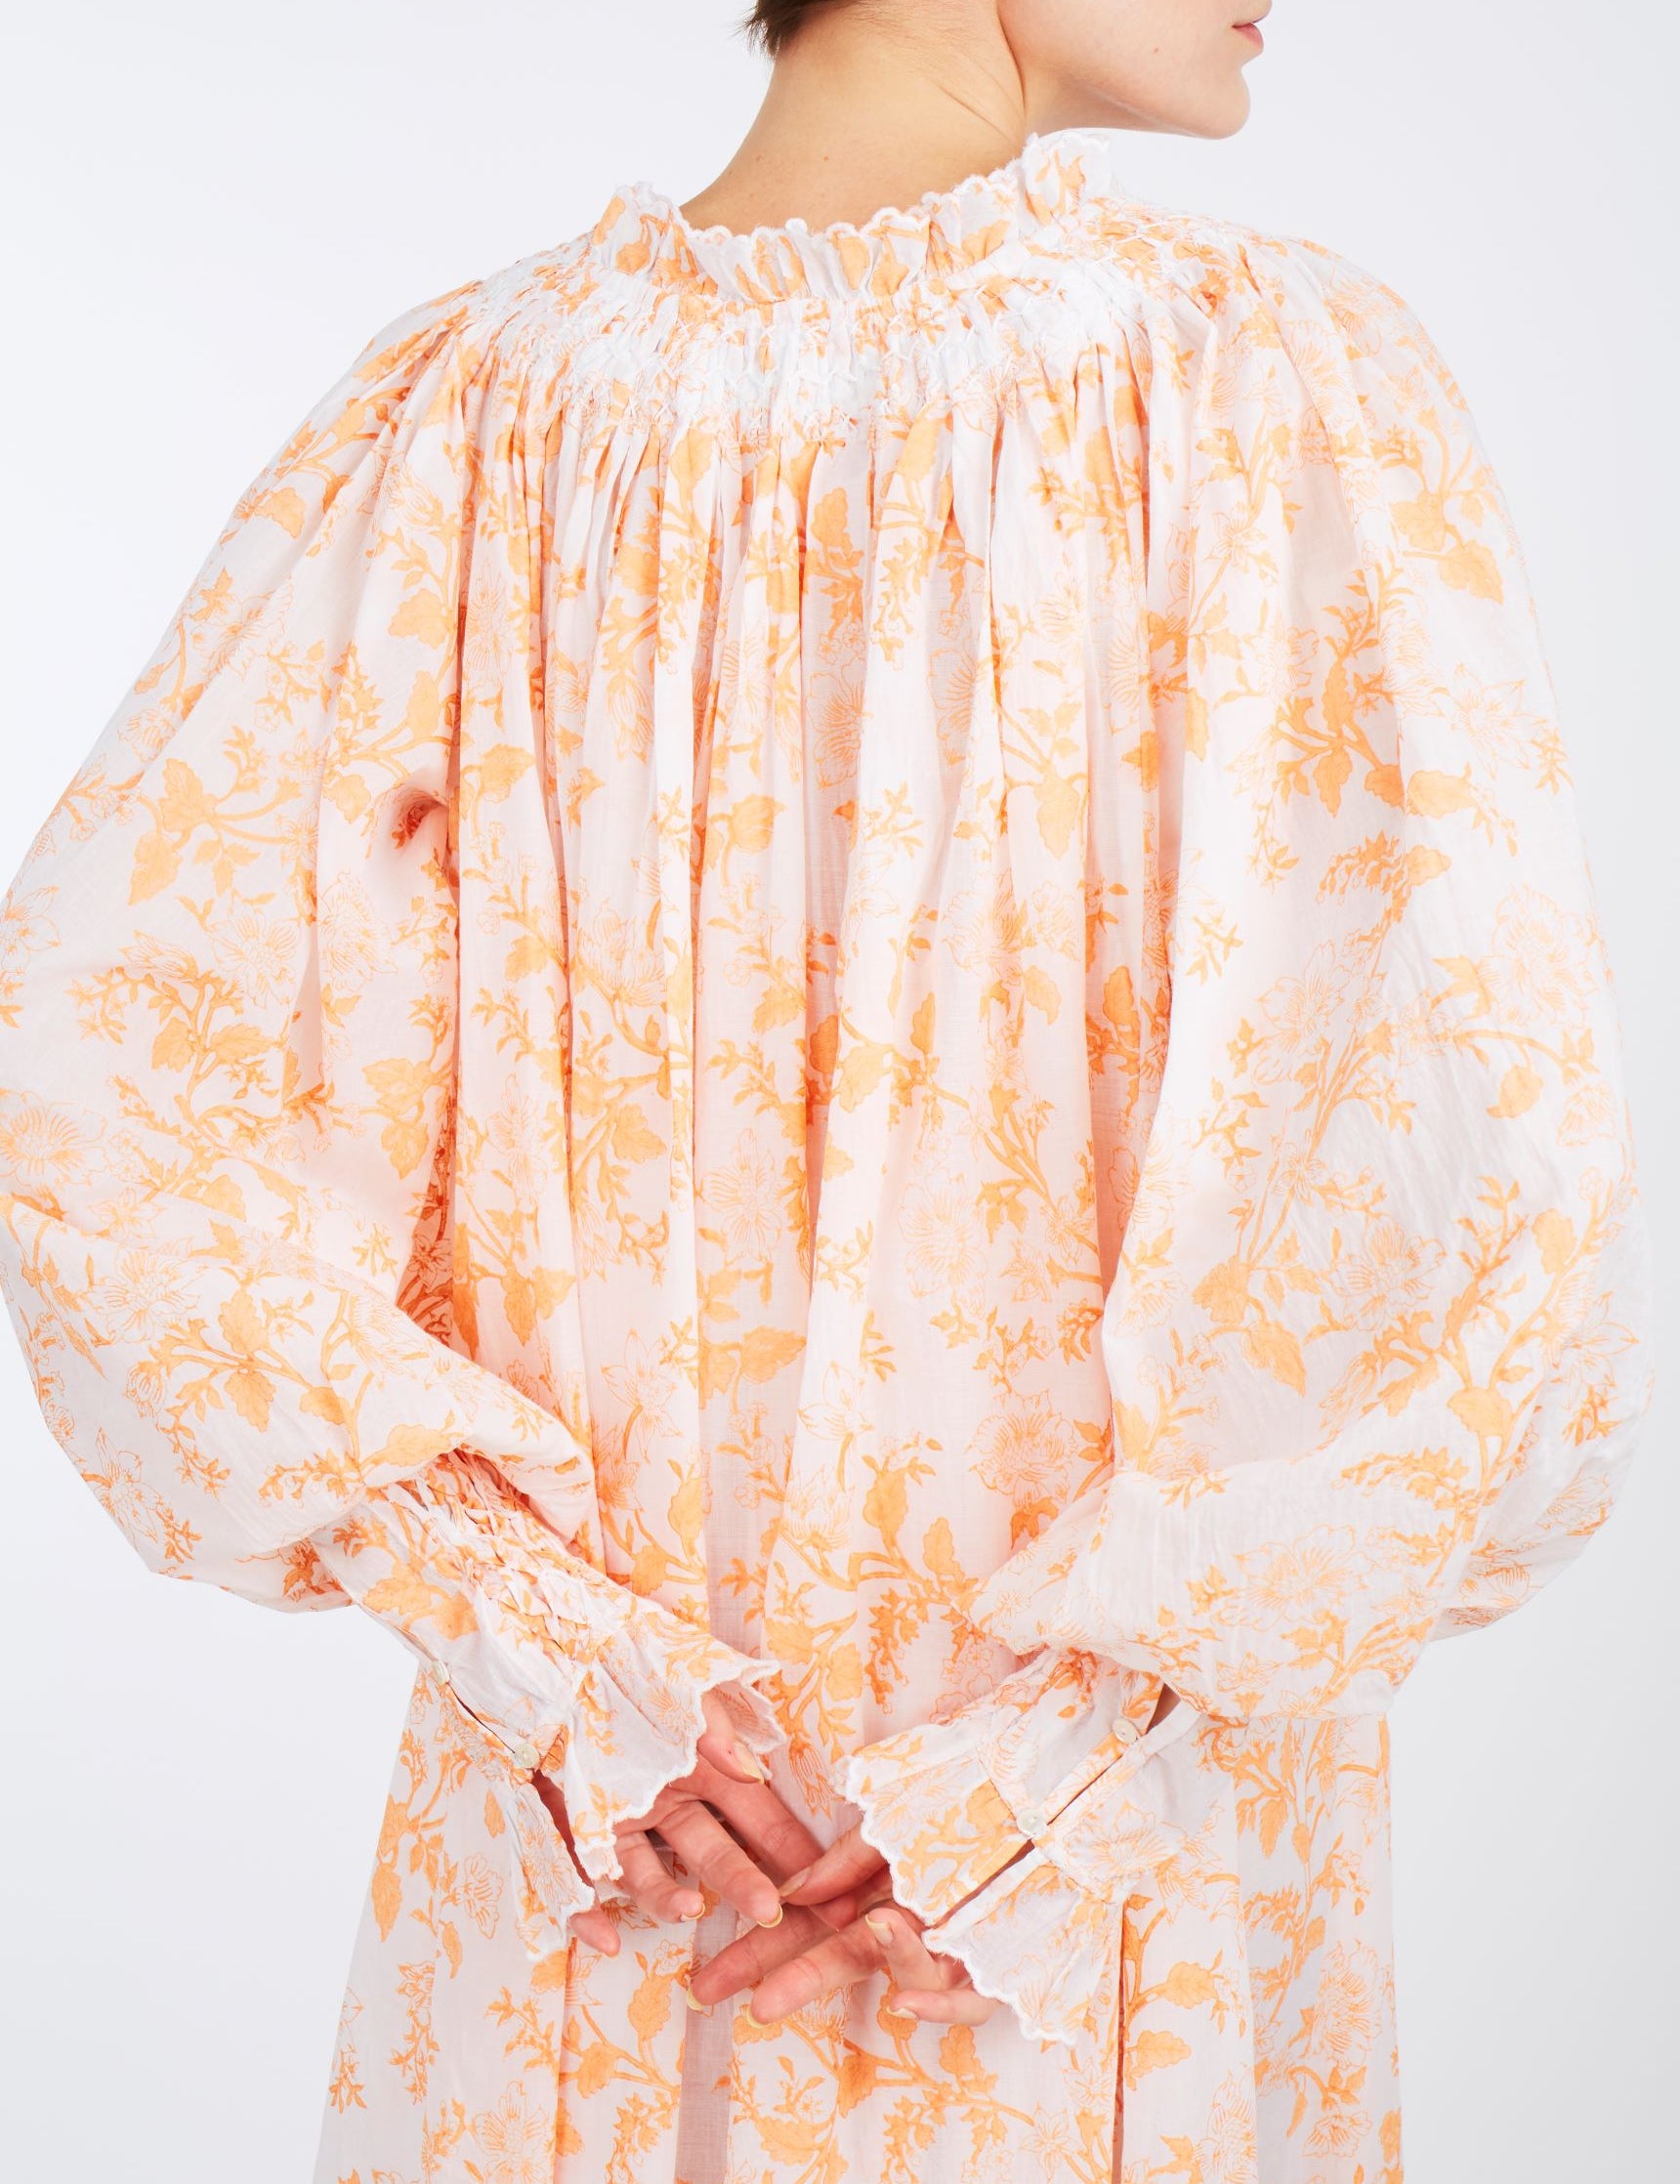 Back detail of Vladia Chintz Apricot Dress by Thierry Colson